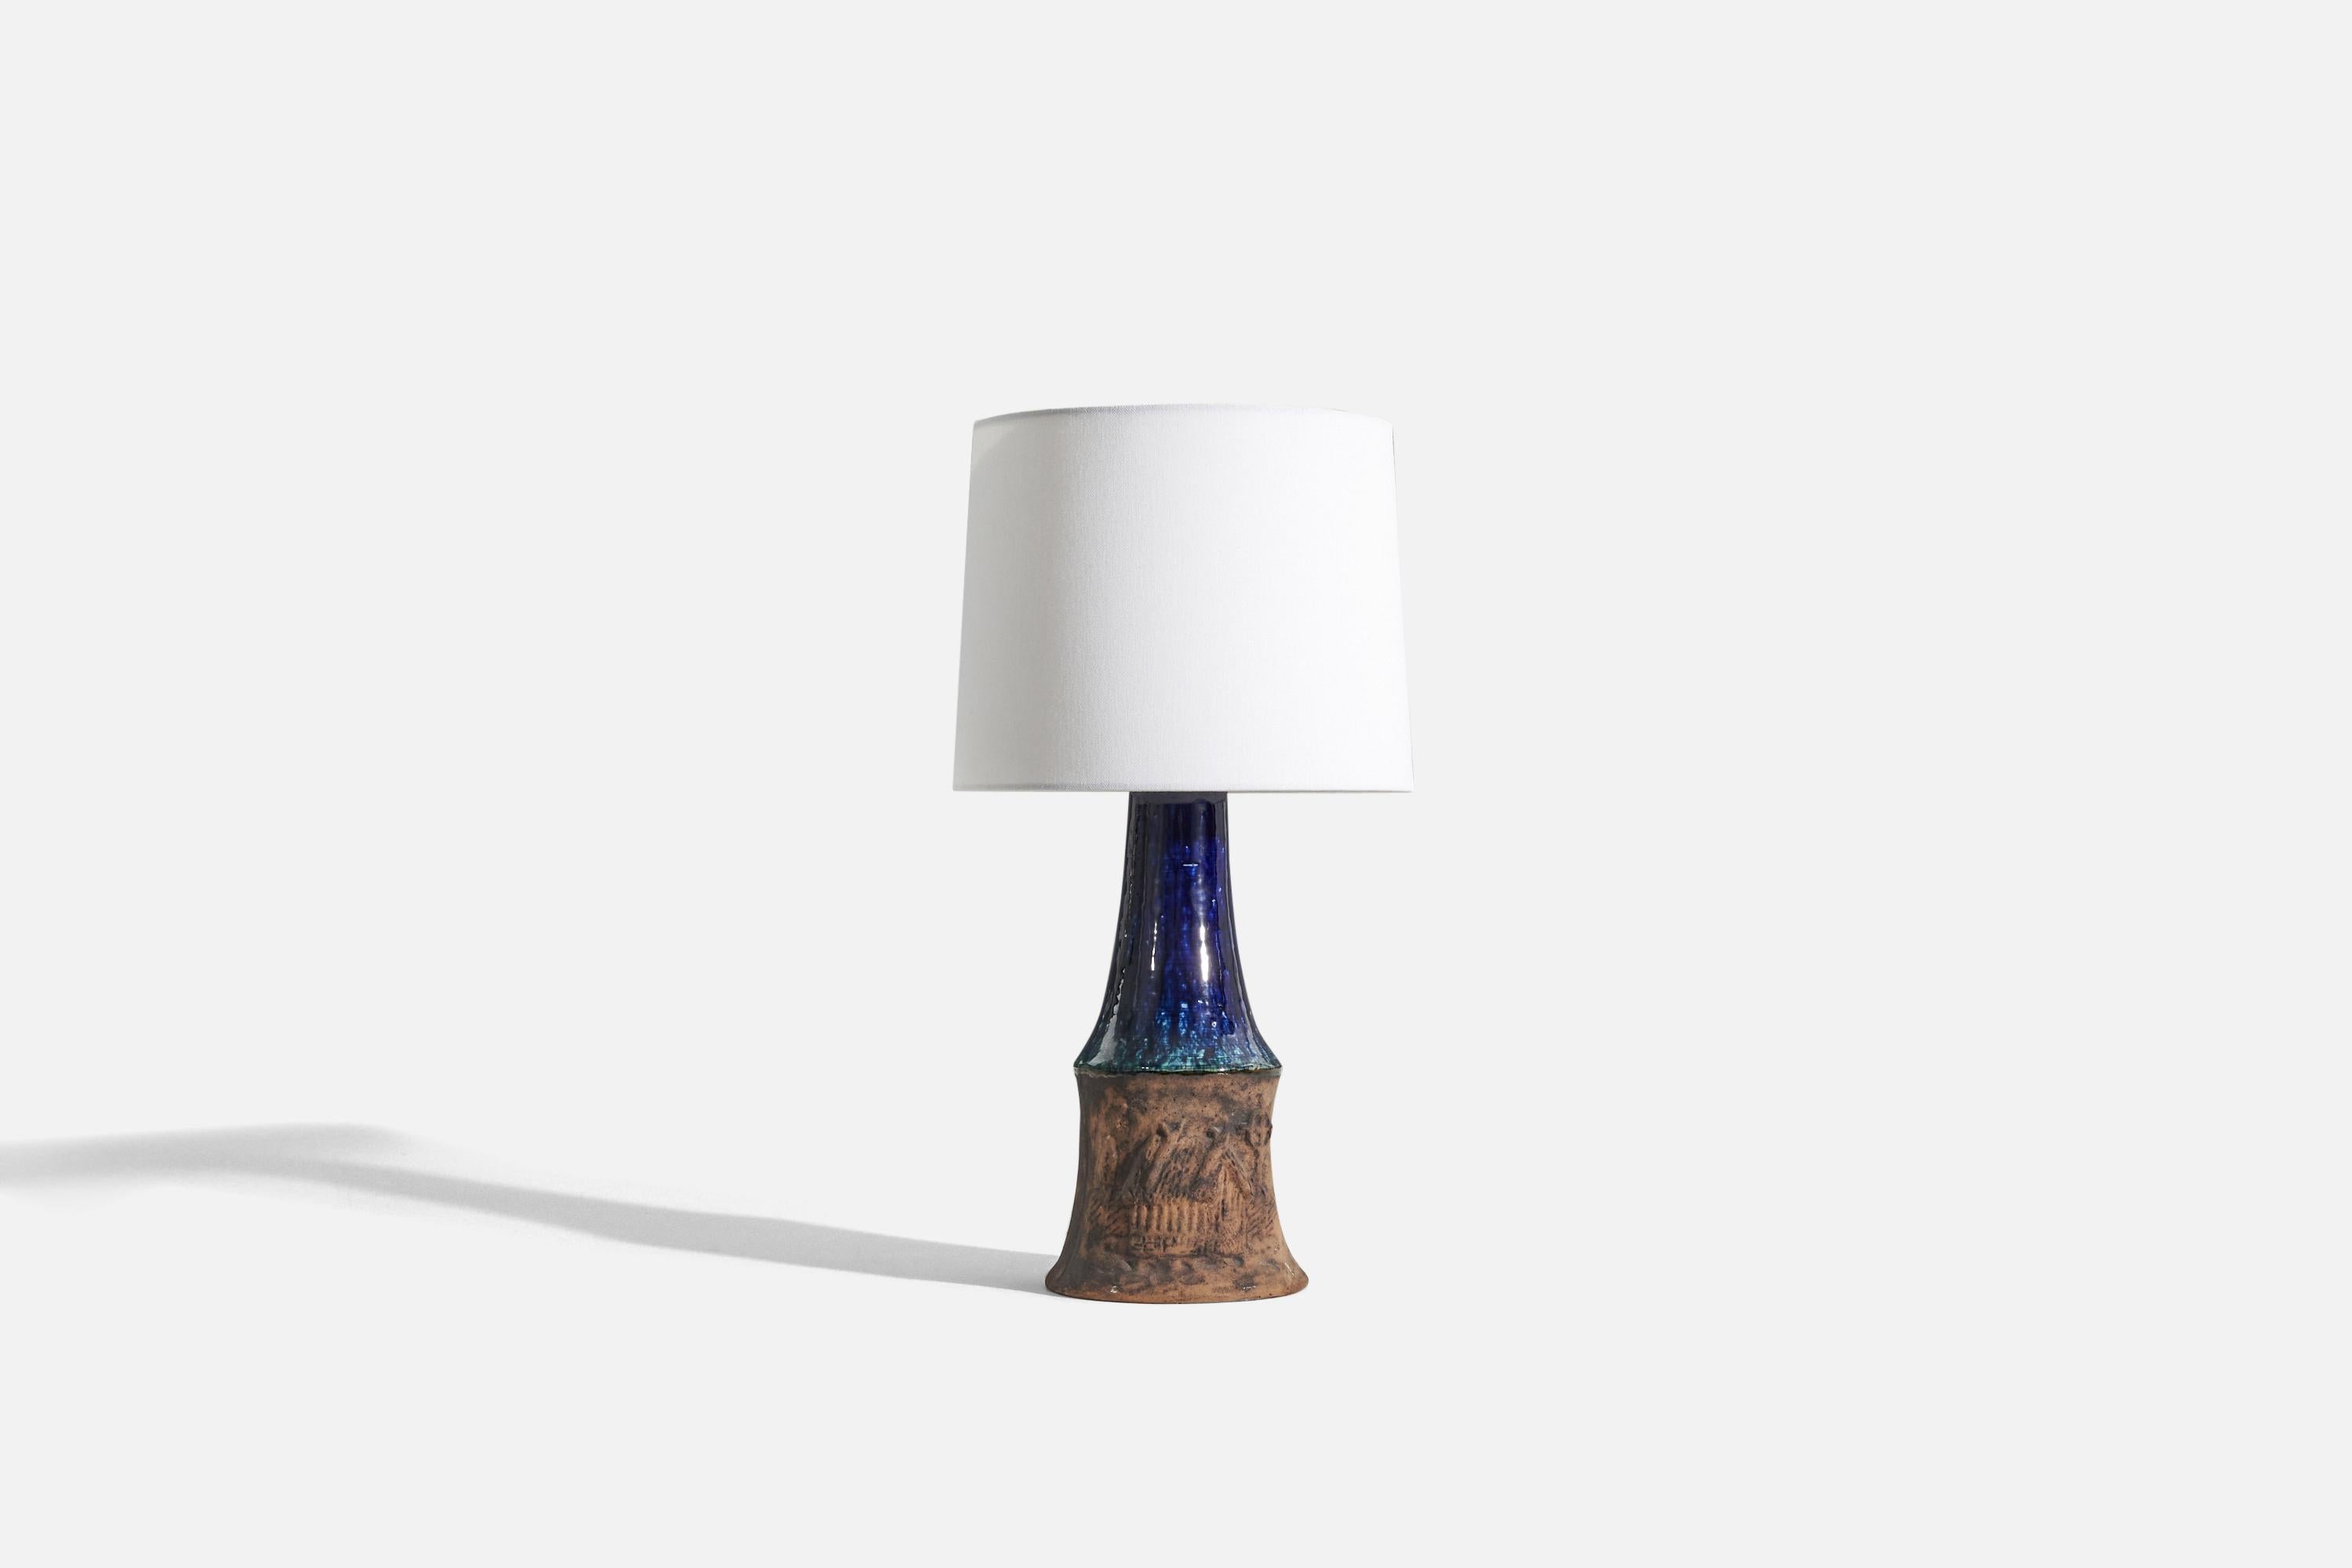 A brown and blue-glazed stoneware table lamp designed by Öcsi Homoki (1935-2017) and produced by Munkavalvet Keramik Visby, Gotland, Sweden, late 1960s. 

Sold without lampshade. 
Dimensions of Lamp (inches) : 14.4375 x 5.6875 x 5.6875(H x W x